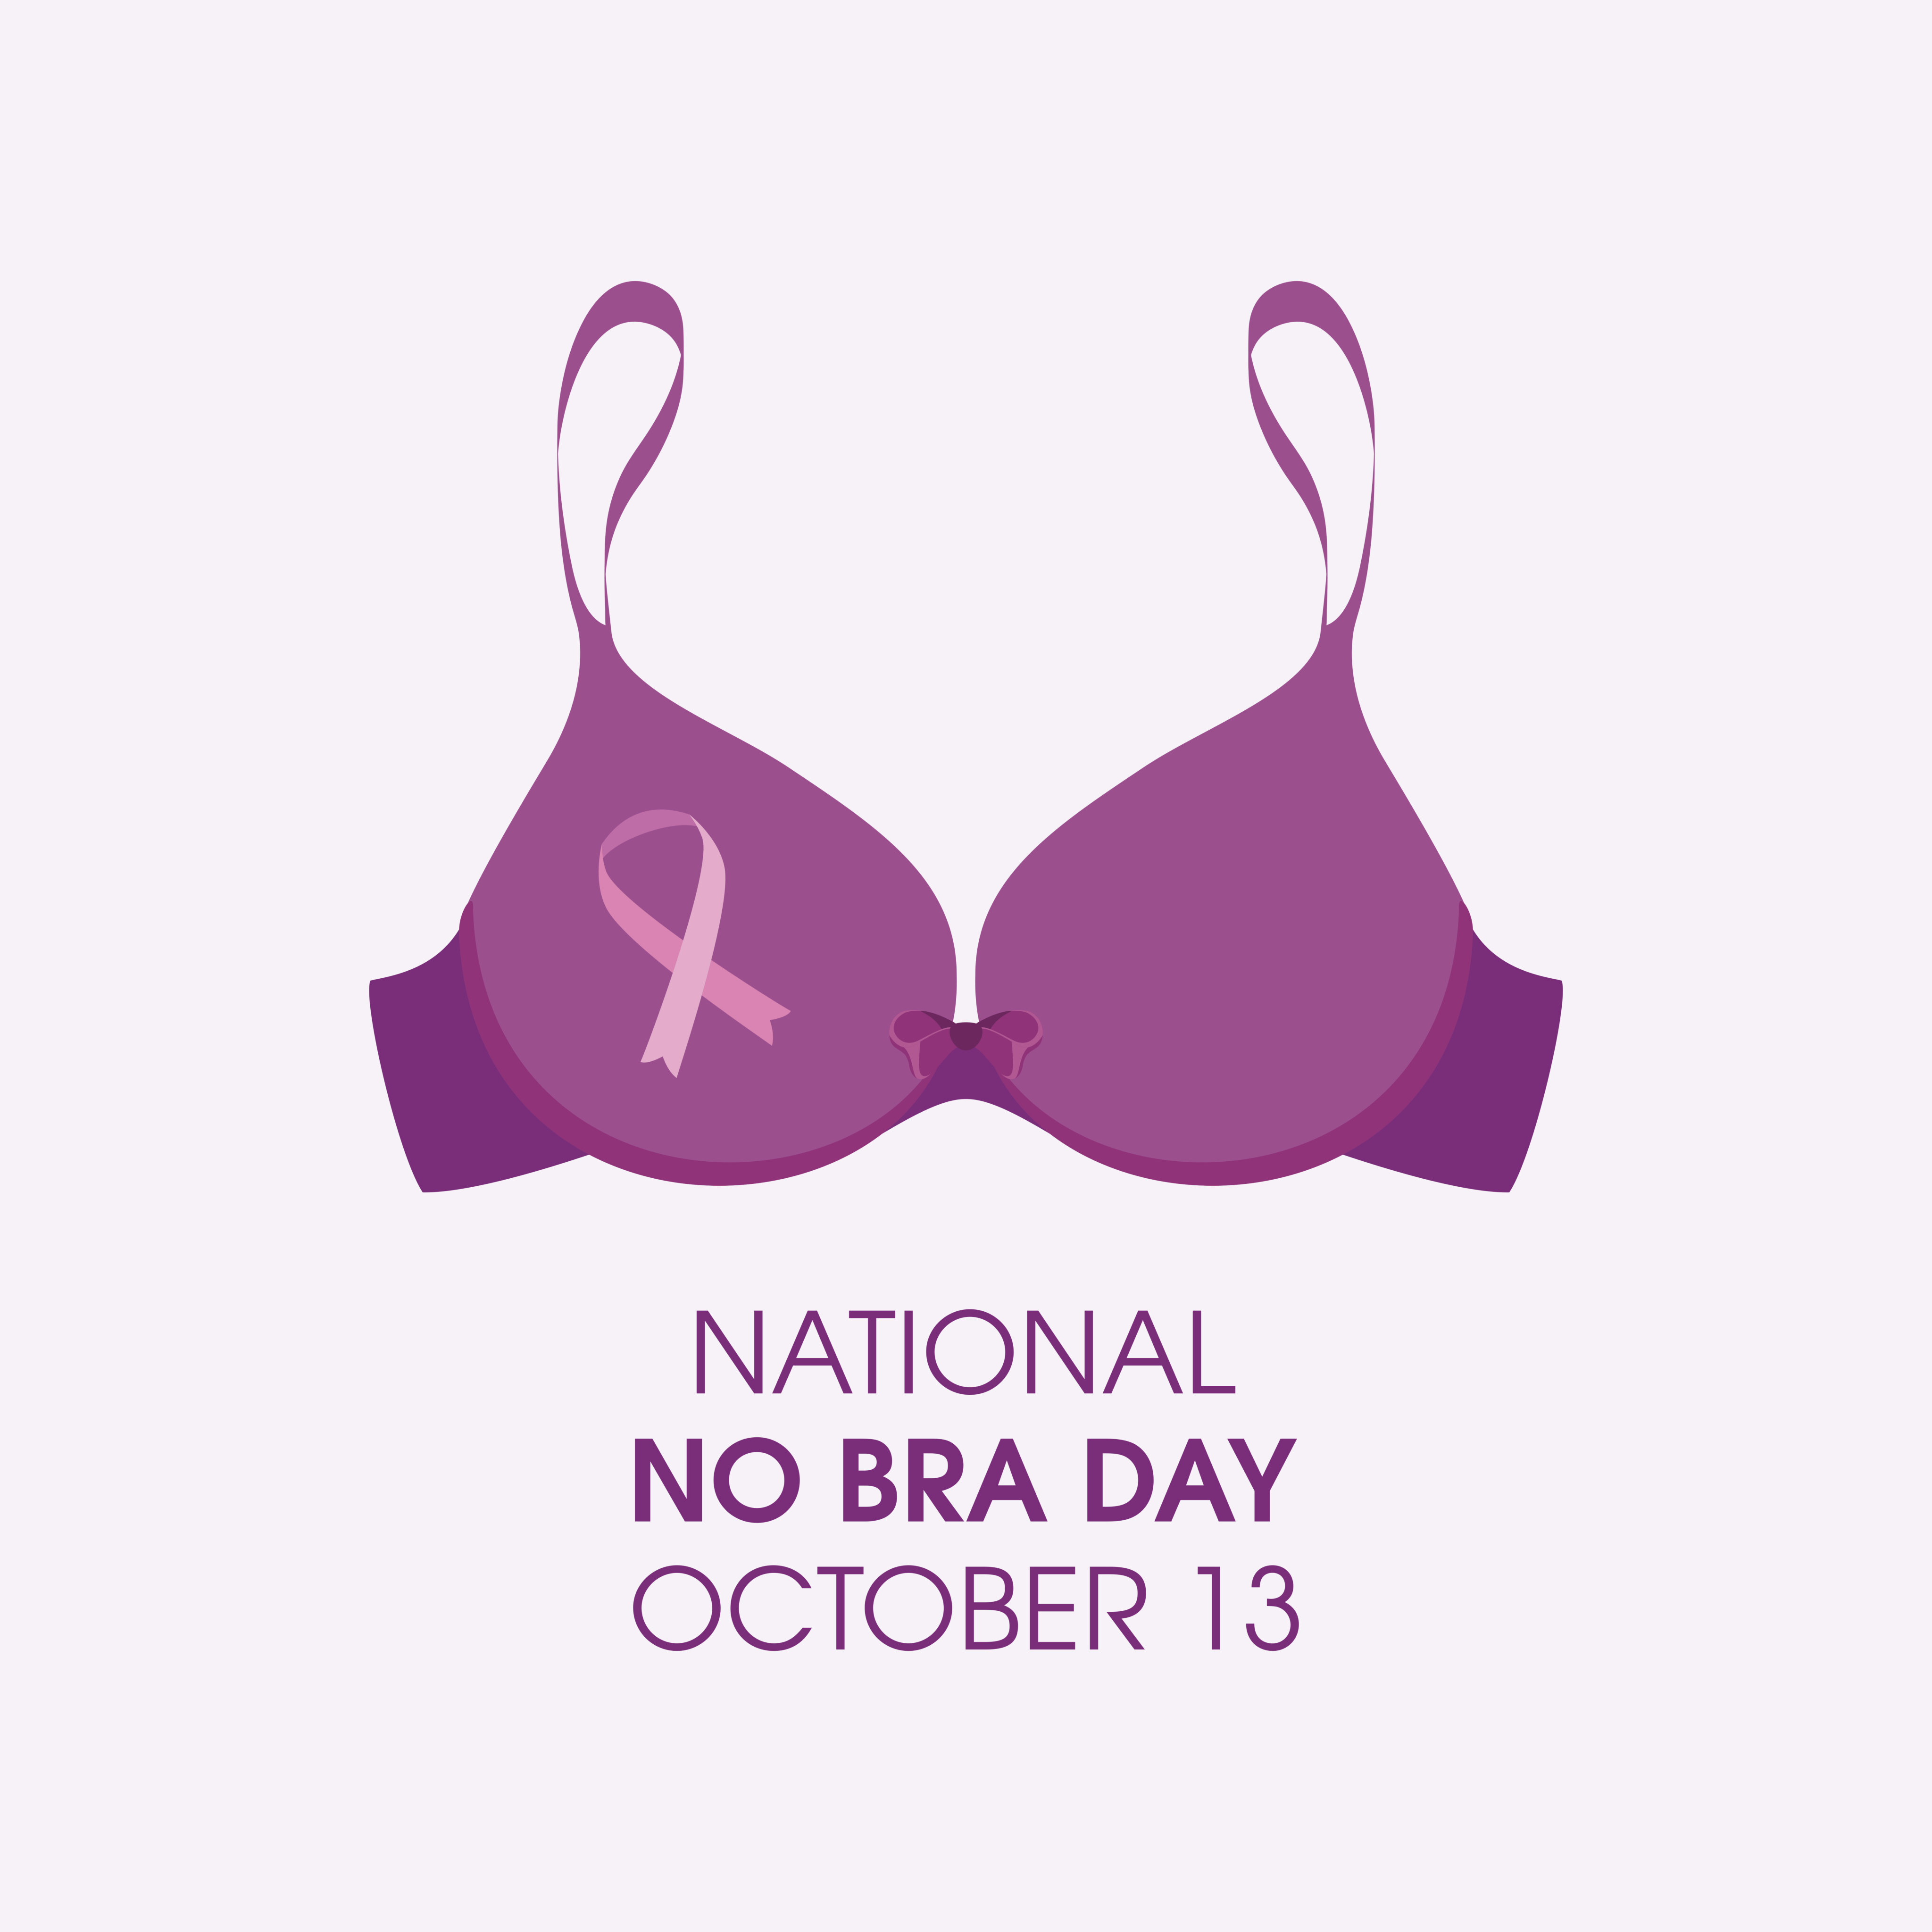 No Bra Day was first launched in 2011 to promote breast cancer awareness. Photo: Getty Images/iStockphoto